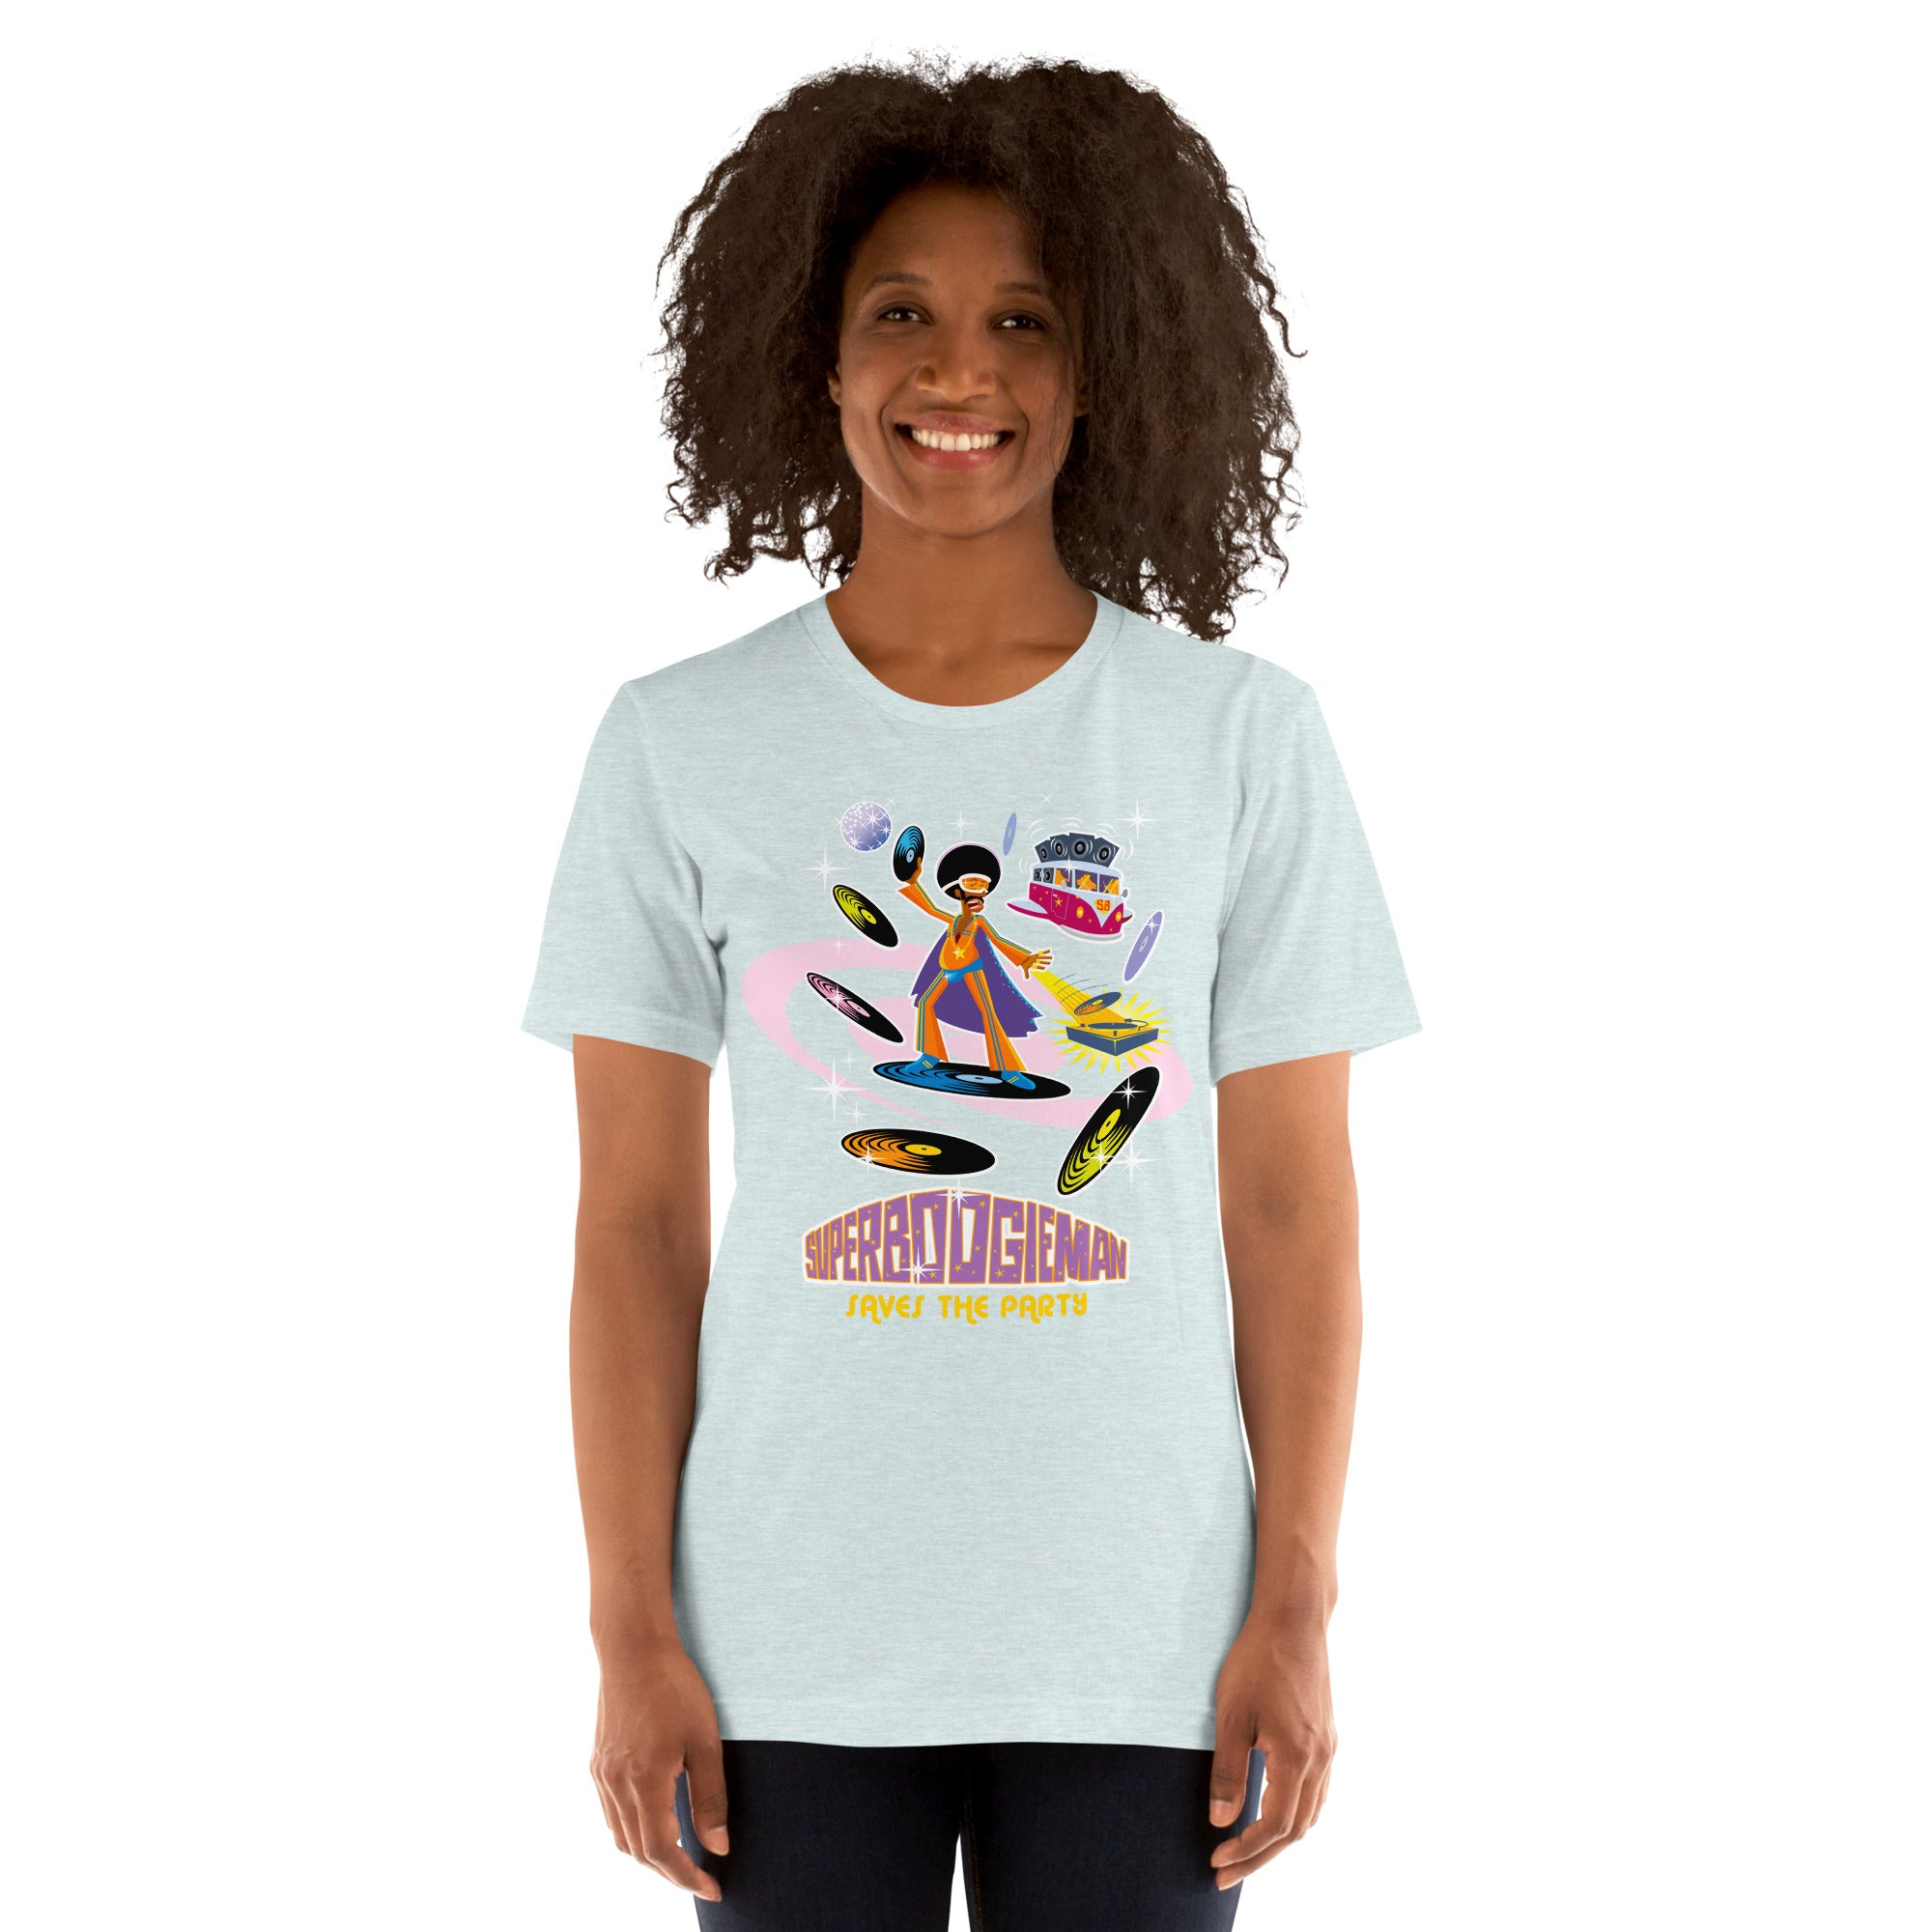 Unisex t-shirt Superboogieman saves the Party on light heather colors